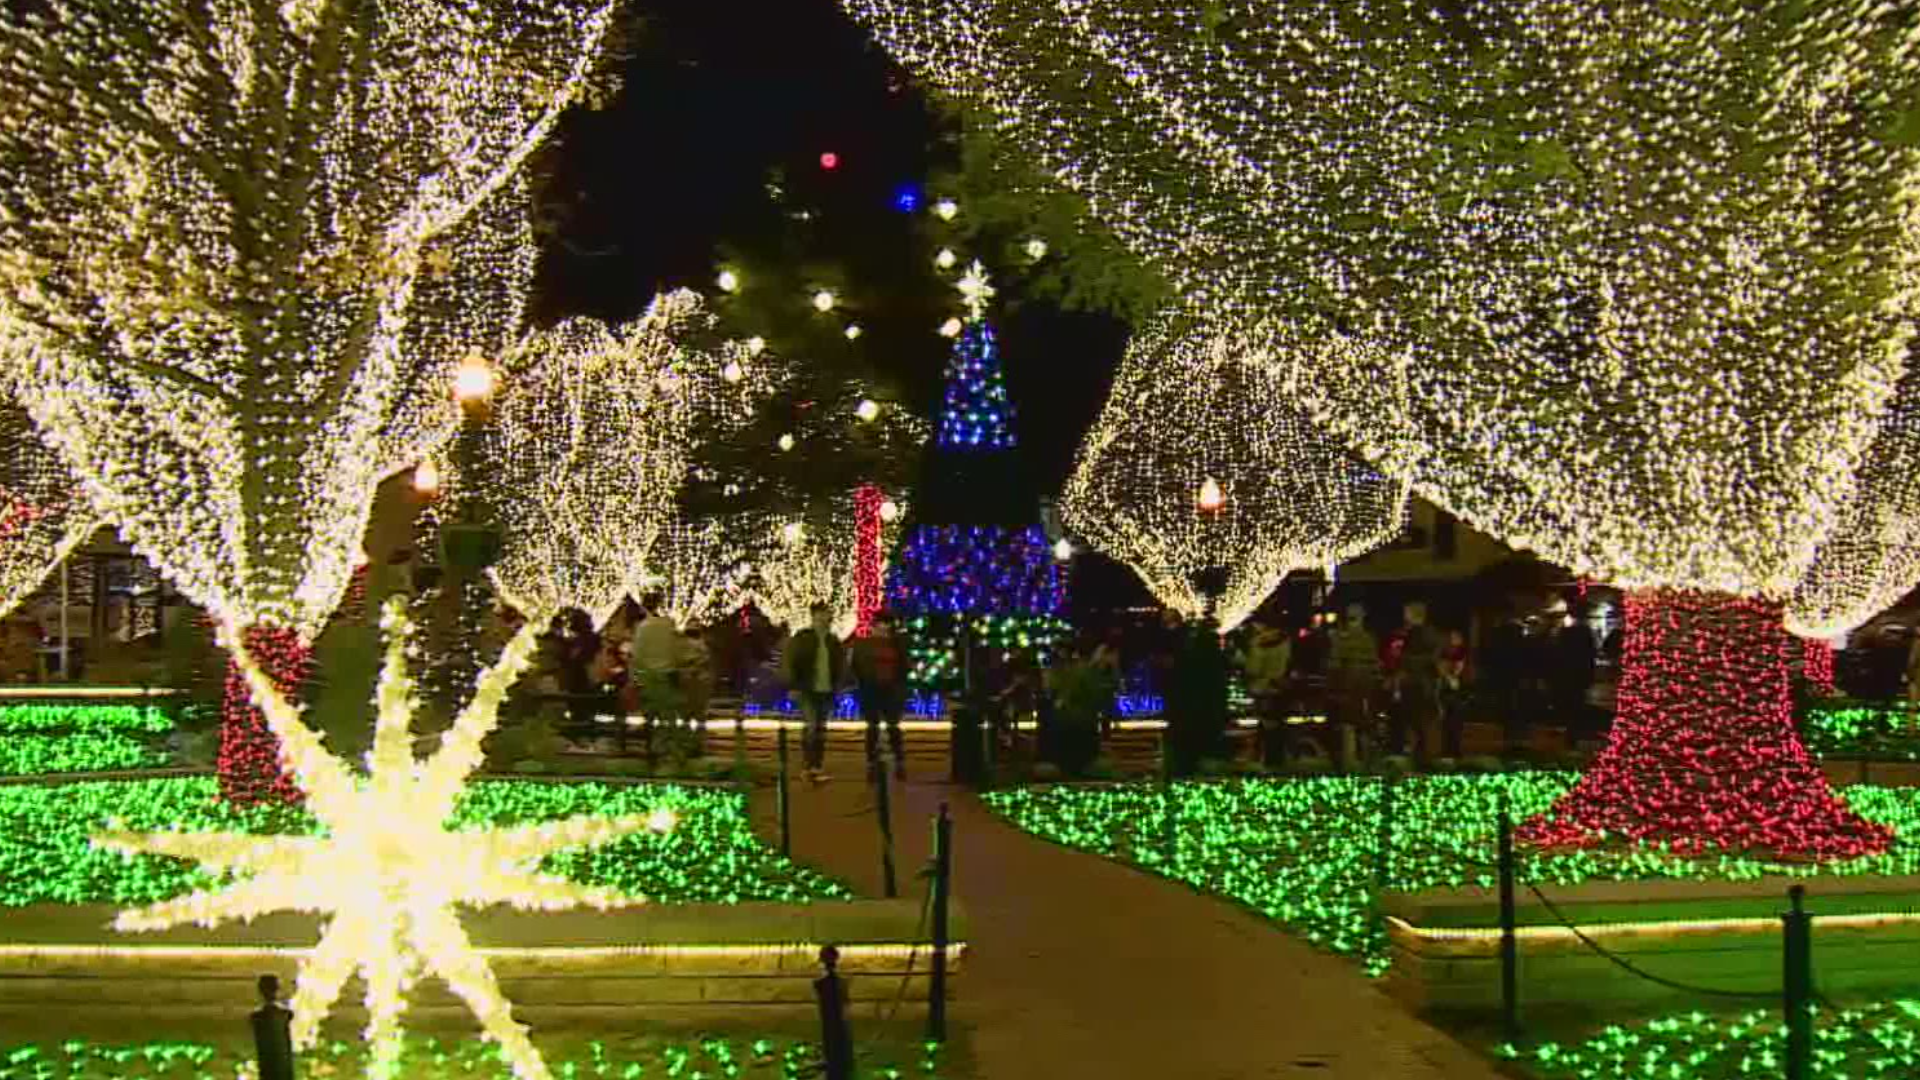 The City of Bentonville decided to flip the switch without a ceremony due to COVID-19, but the lights will remain on every night throughout the holiday season.